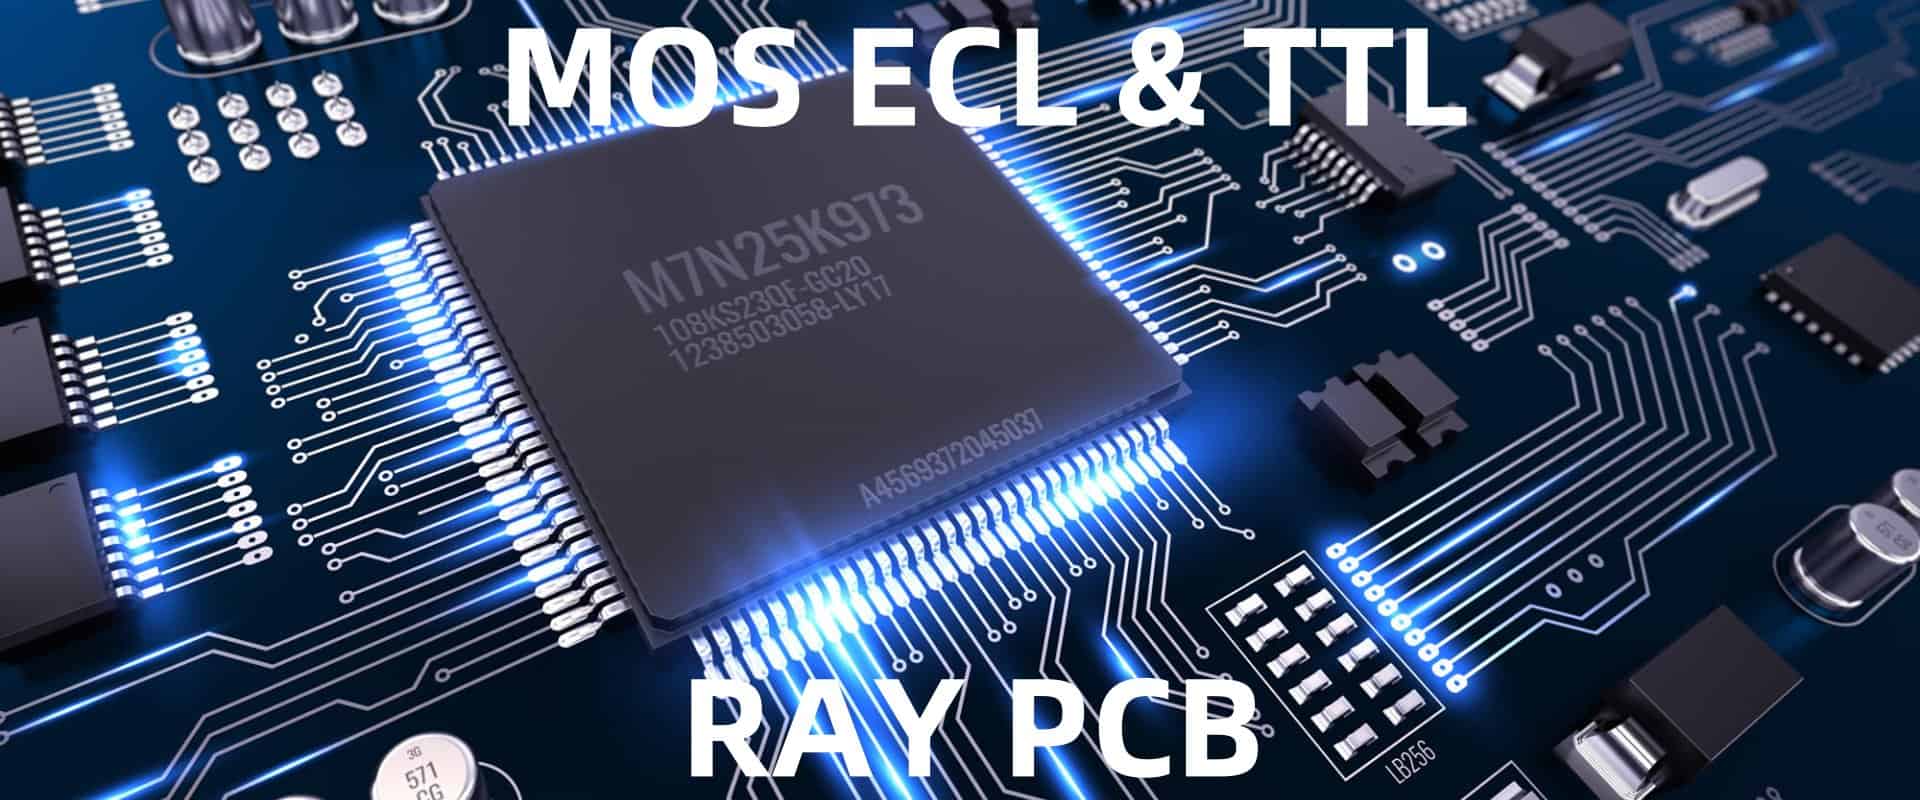 All About CMOS, ECL, and TTL Propagation Delay in High-Speed PCBs